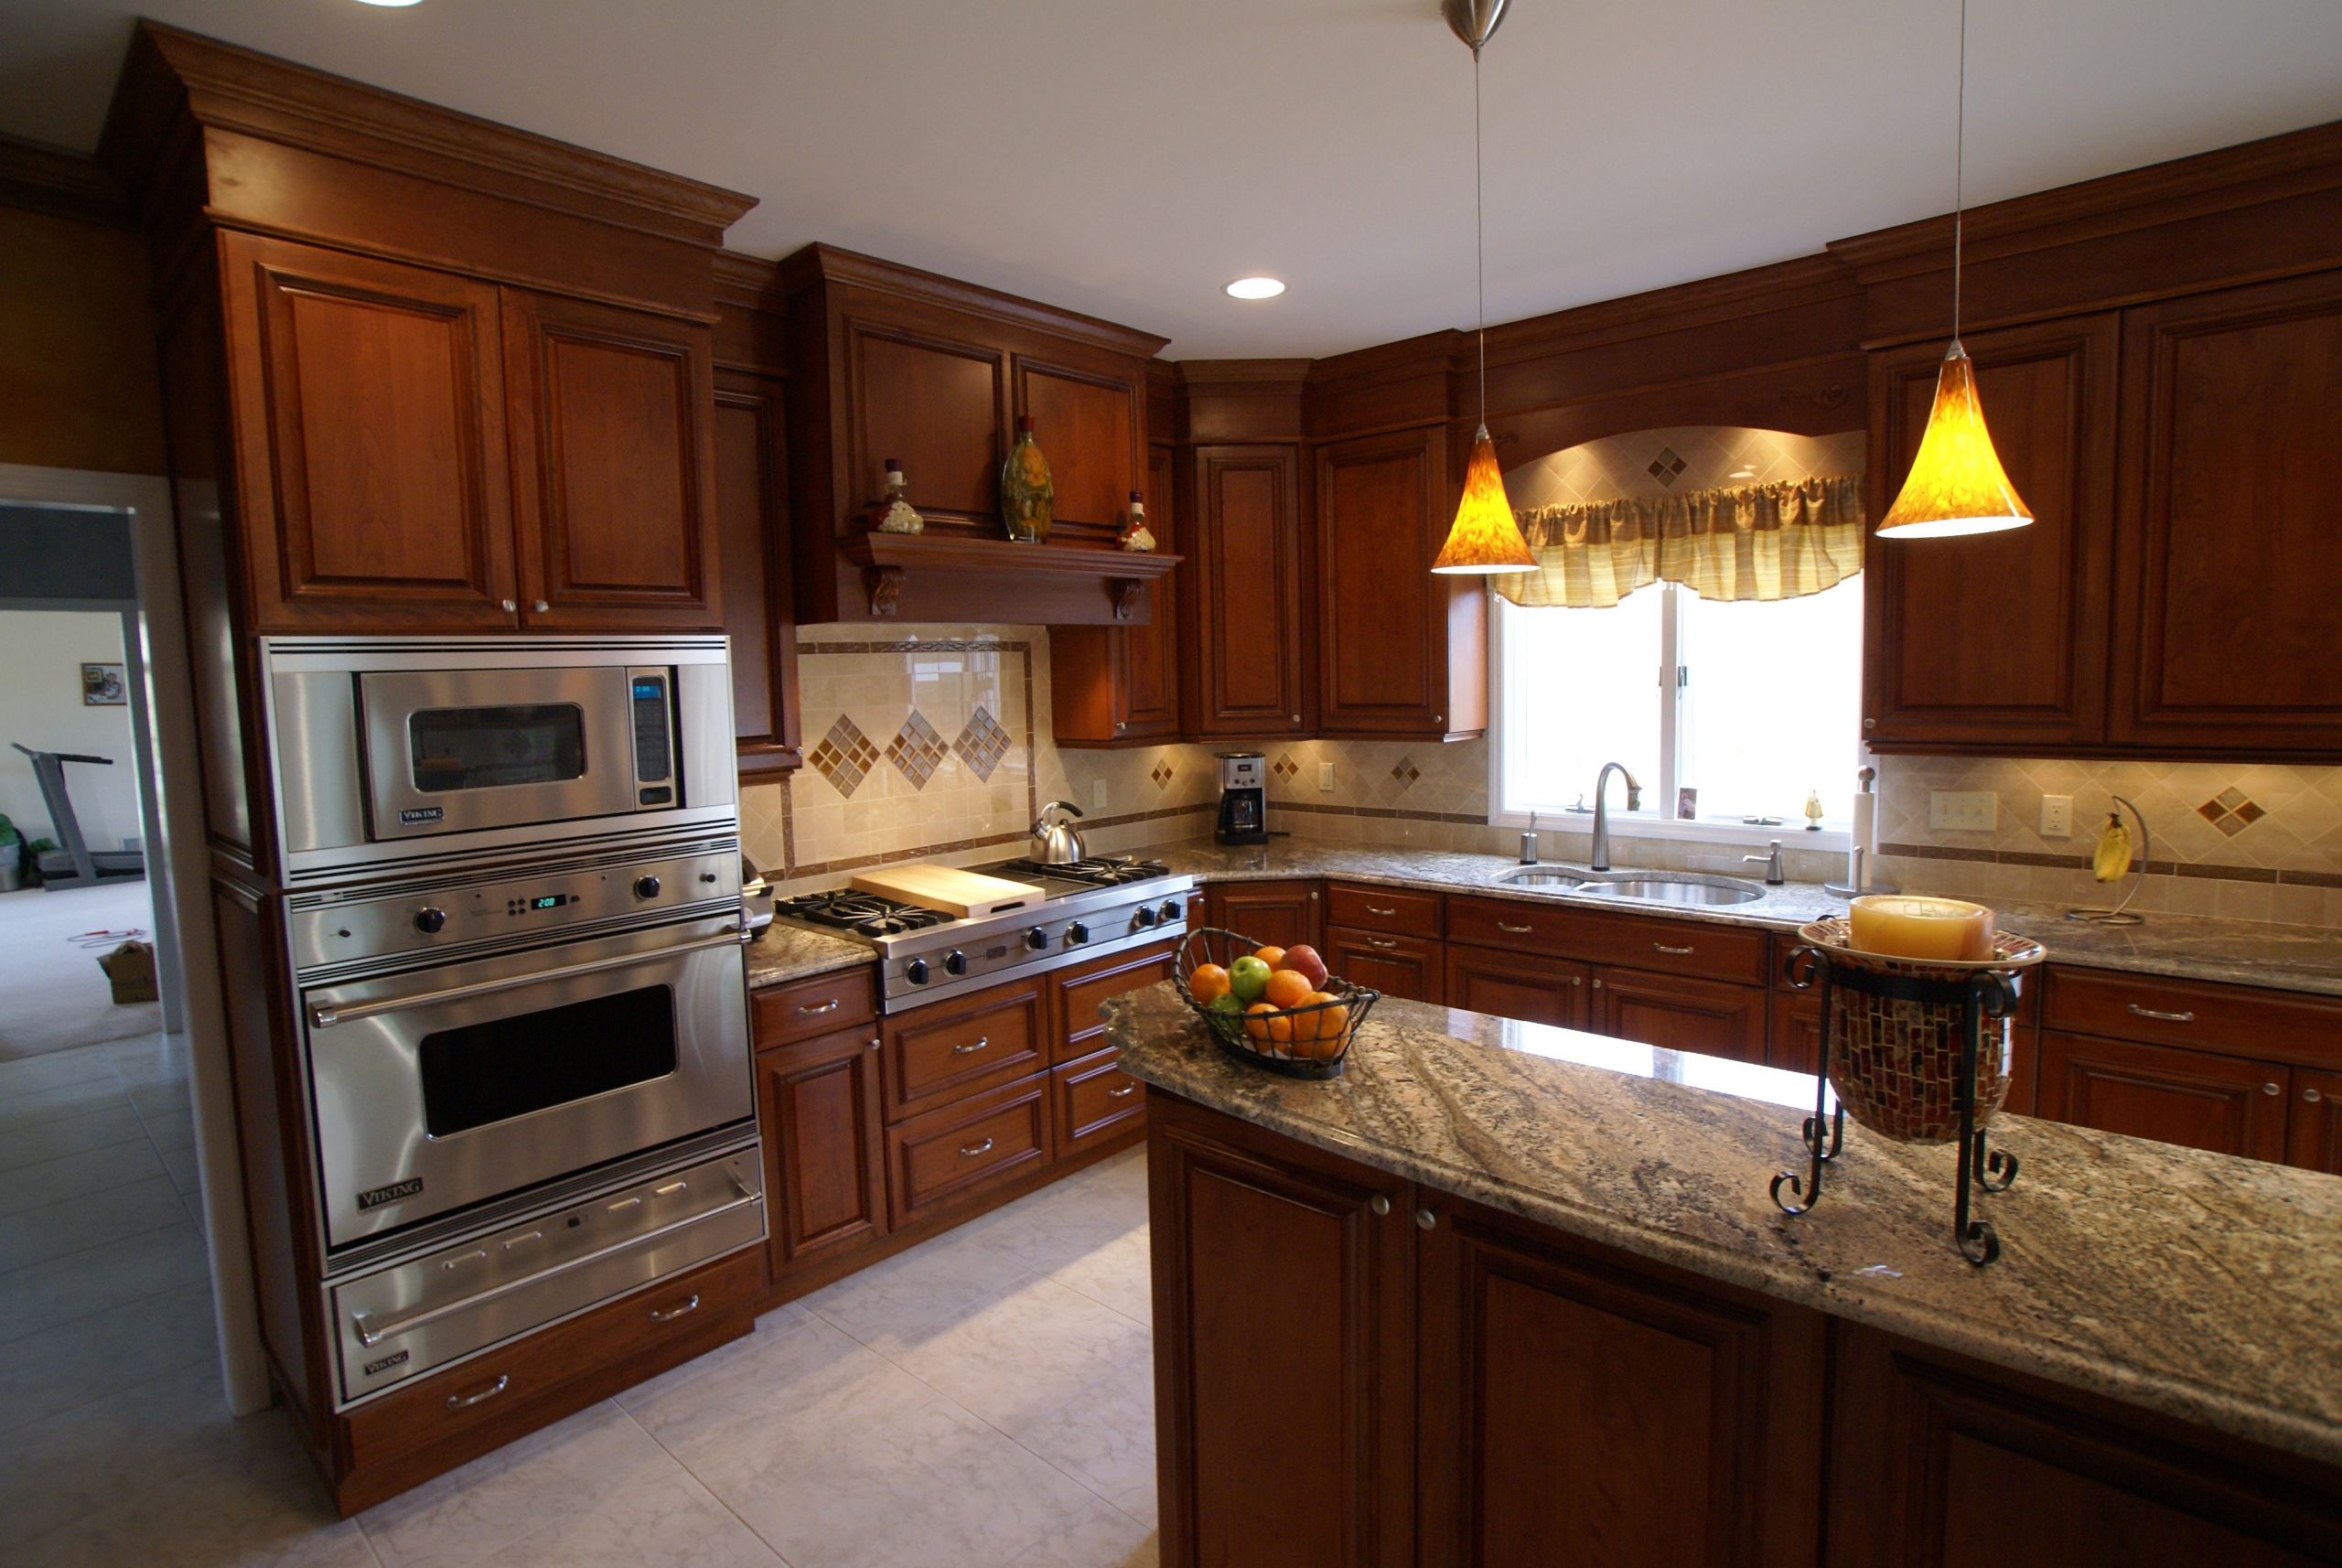 Kitchen Remodeling Tips
 Monmouth County Kitchen Remodeling Ideas to Inspire You